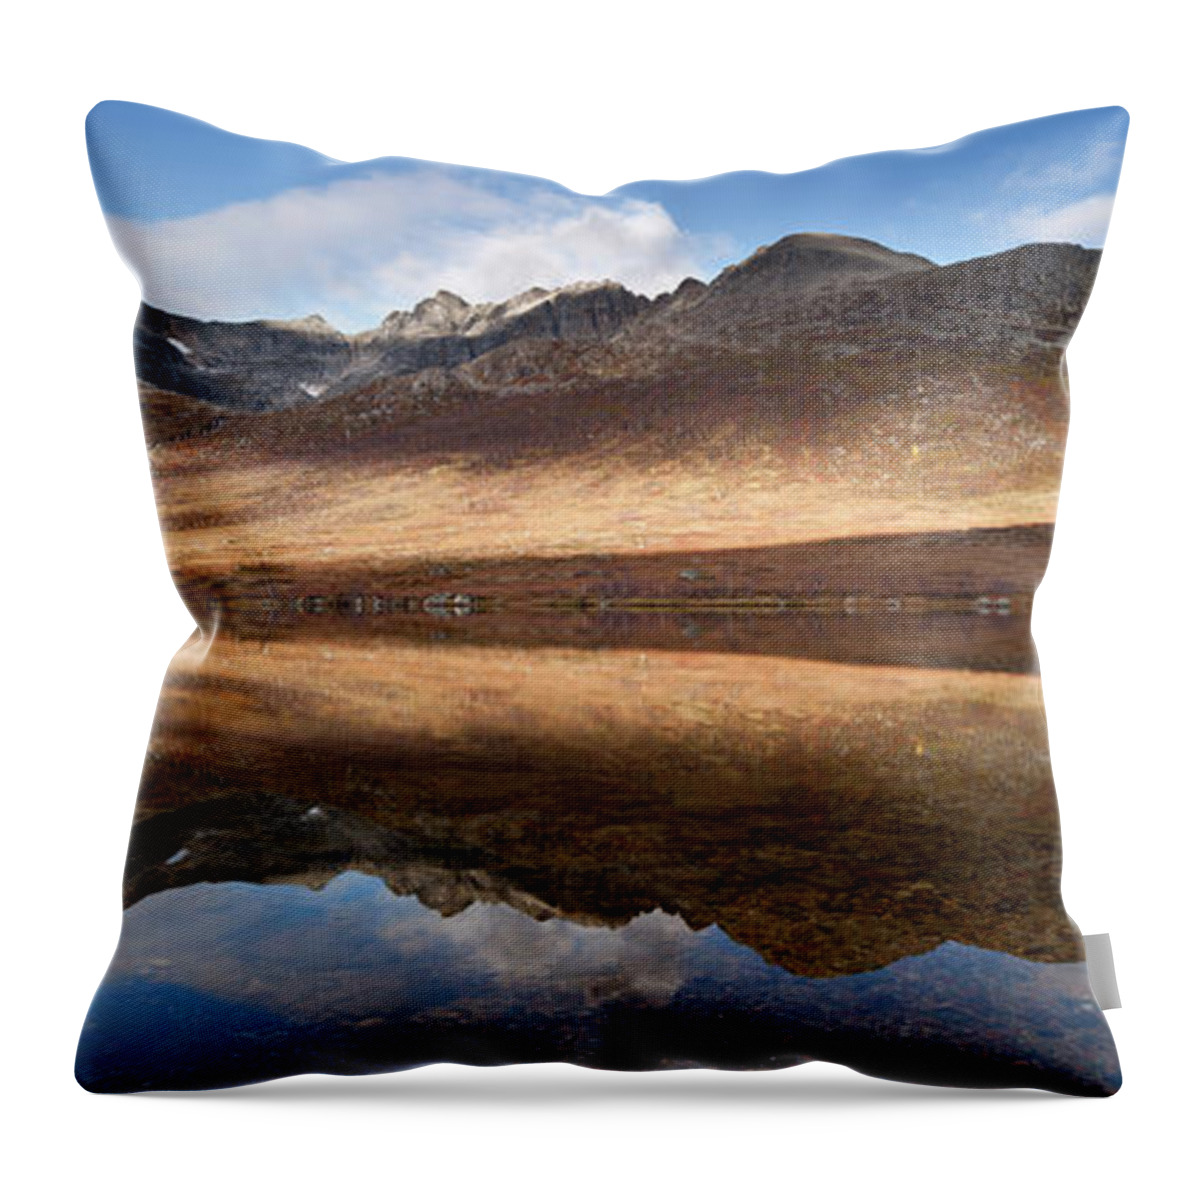 Scenics Throw Pillow featuring the photograph Mountains At Kattfjord, Near Tromso by David Clapp